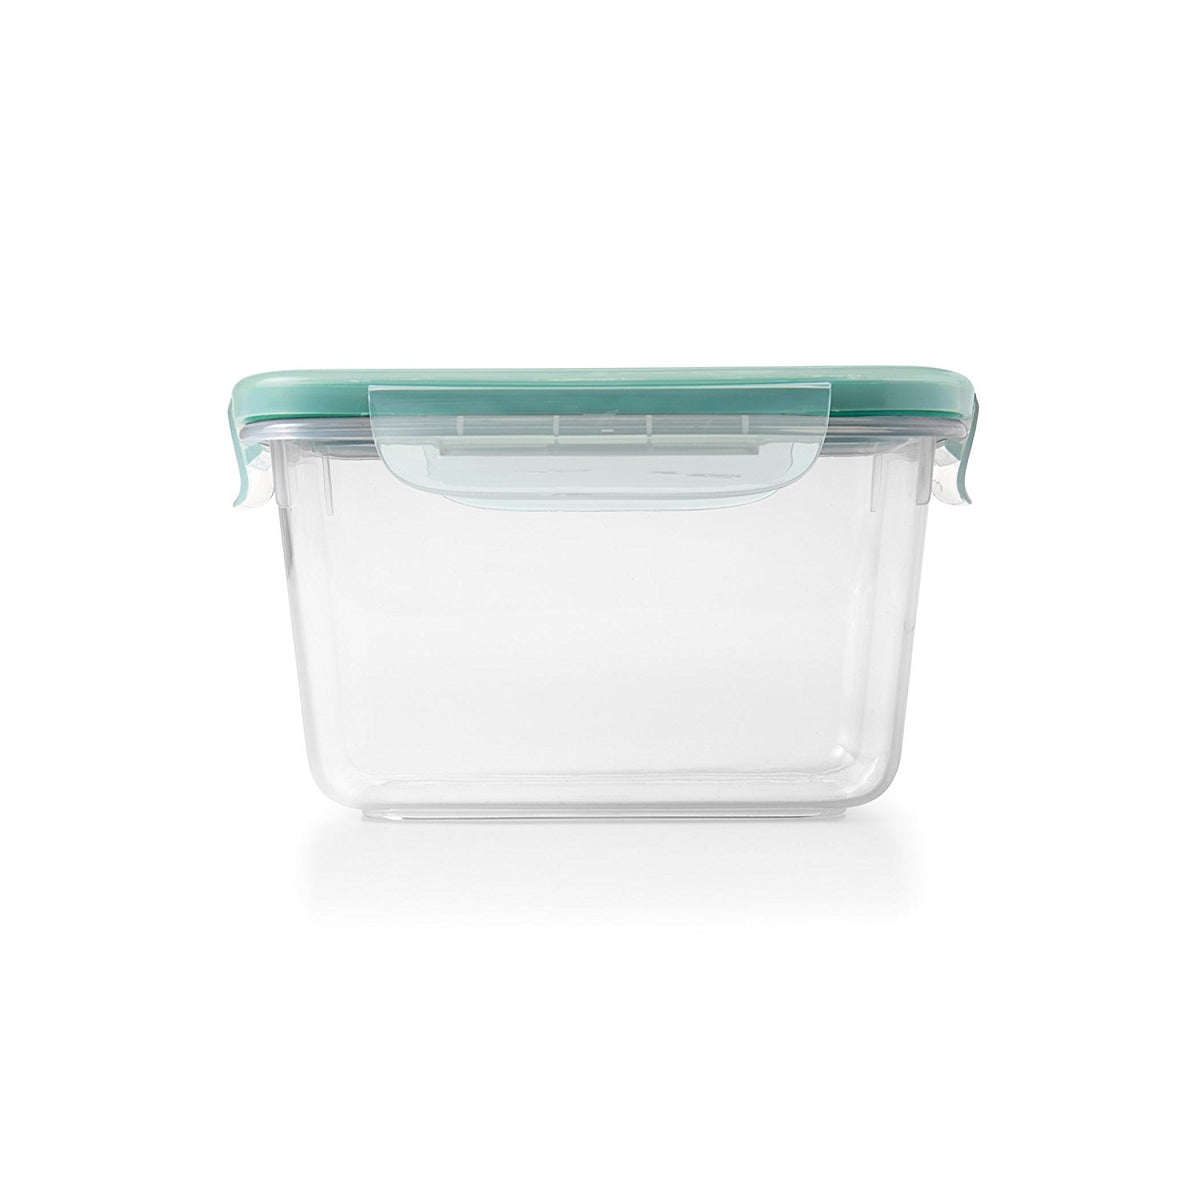 buy food containers at cheap rate in bulk. wholesale & retail kitchen equipments & tools store.